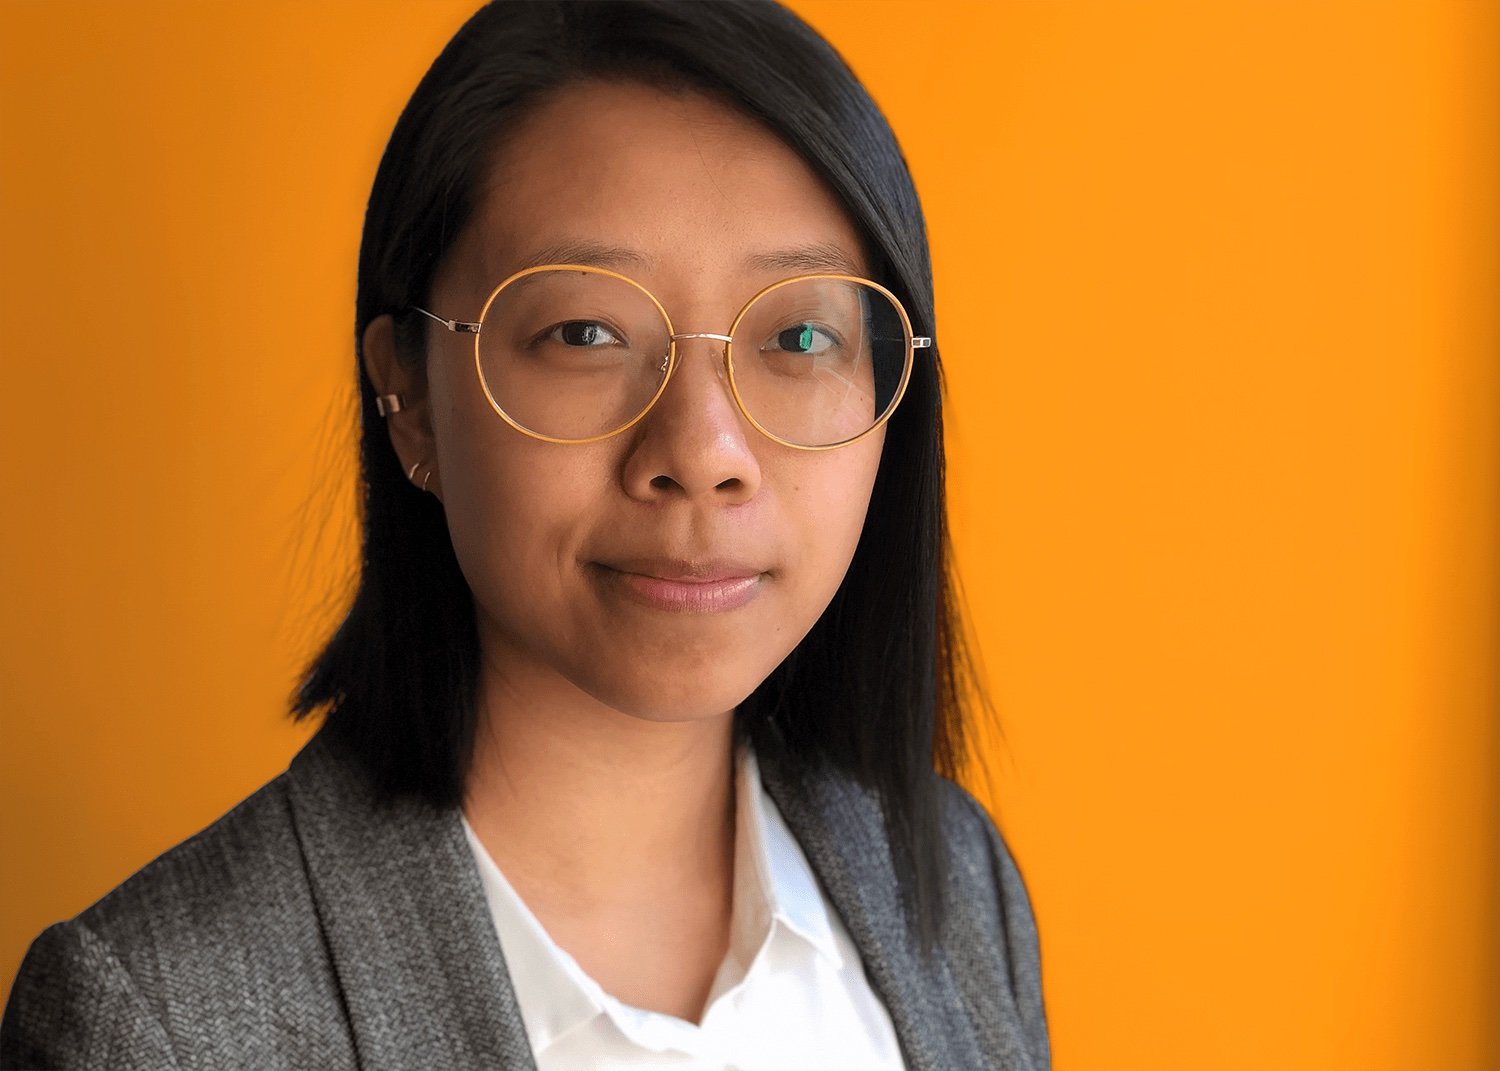 Sisi Wei will be the new editor-in-chief of The Markup.